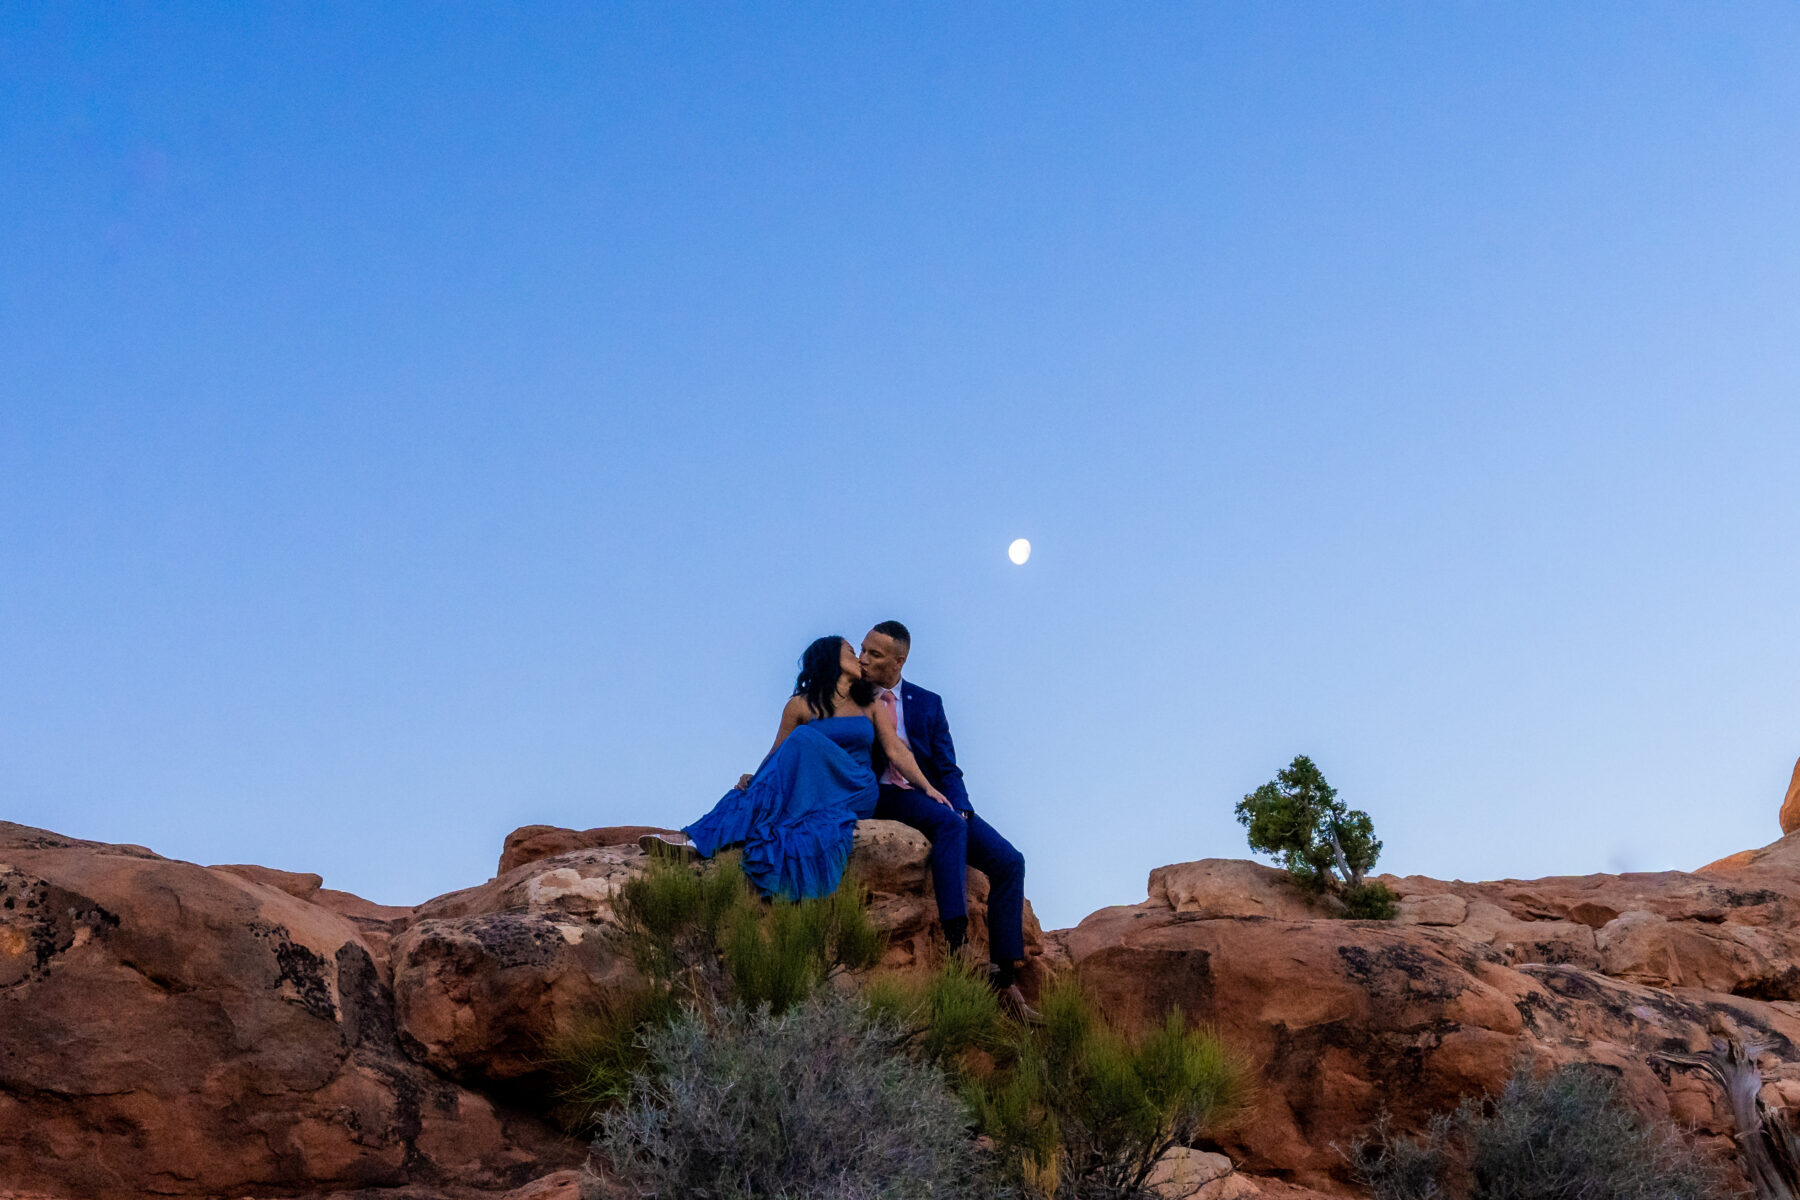 04.30.2021 Rachelle and Shane Engagement and Moab Style Shoot